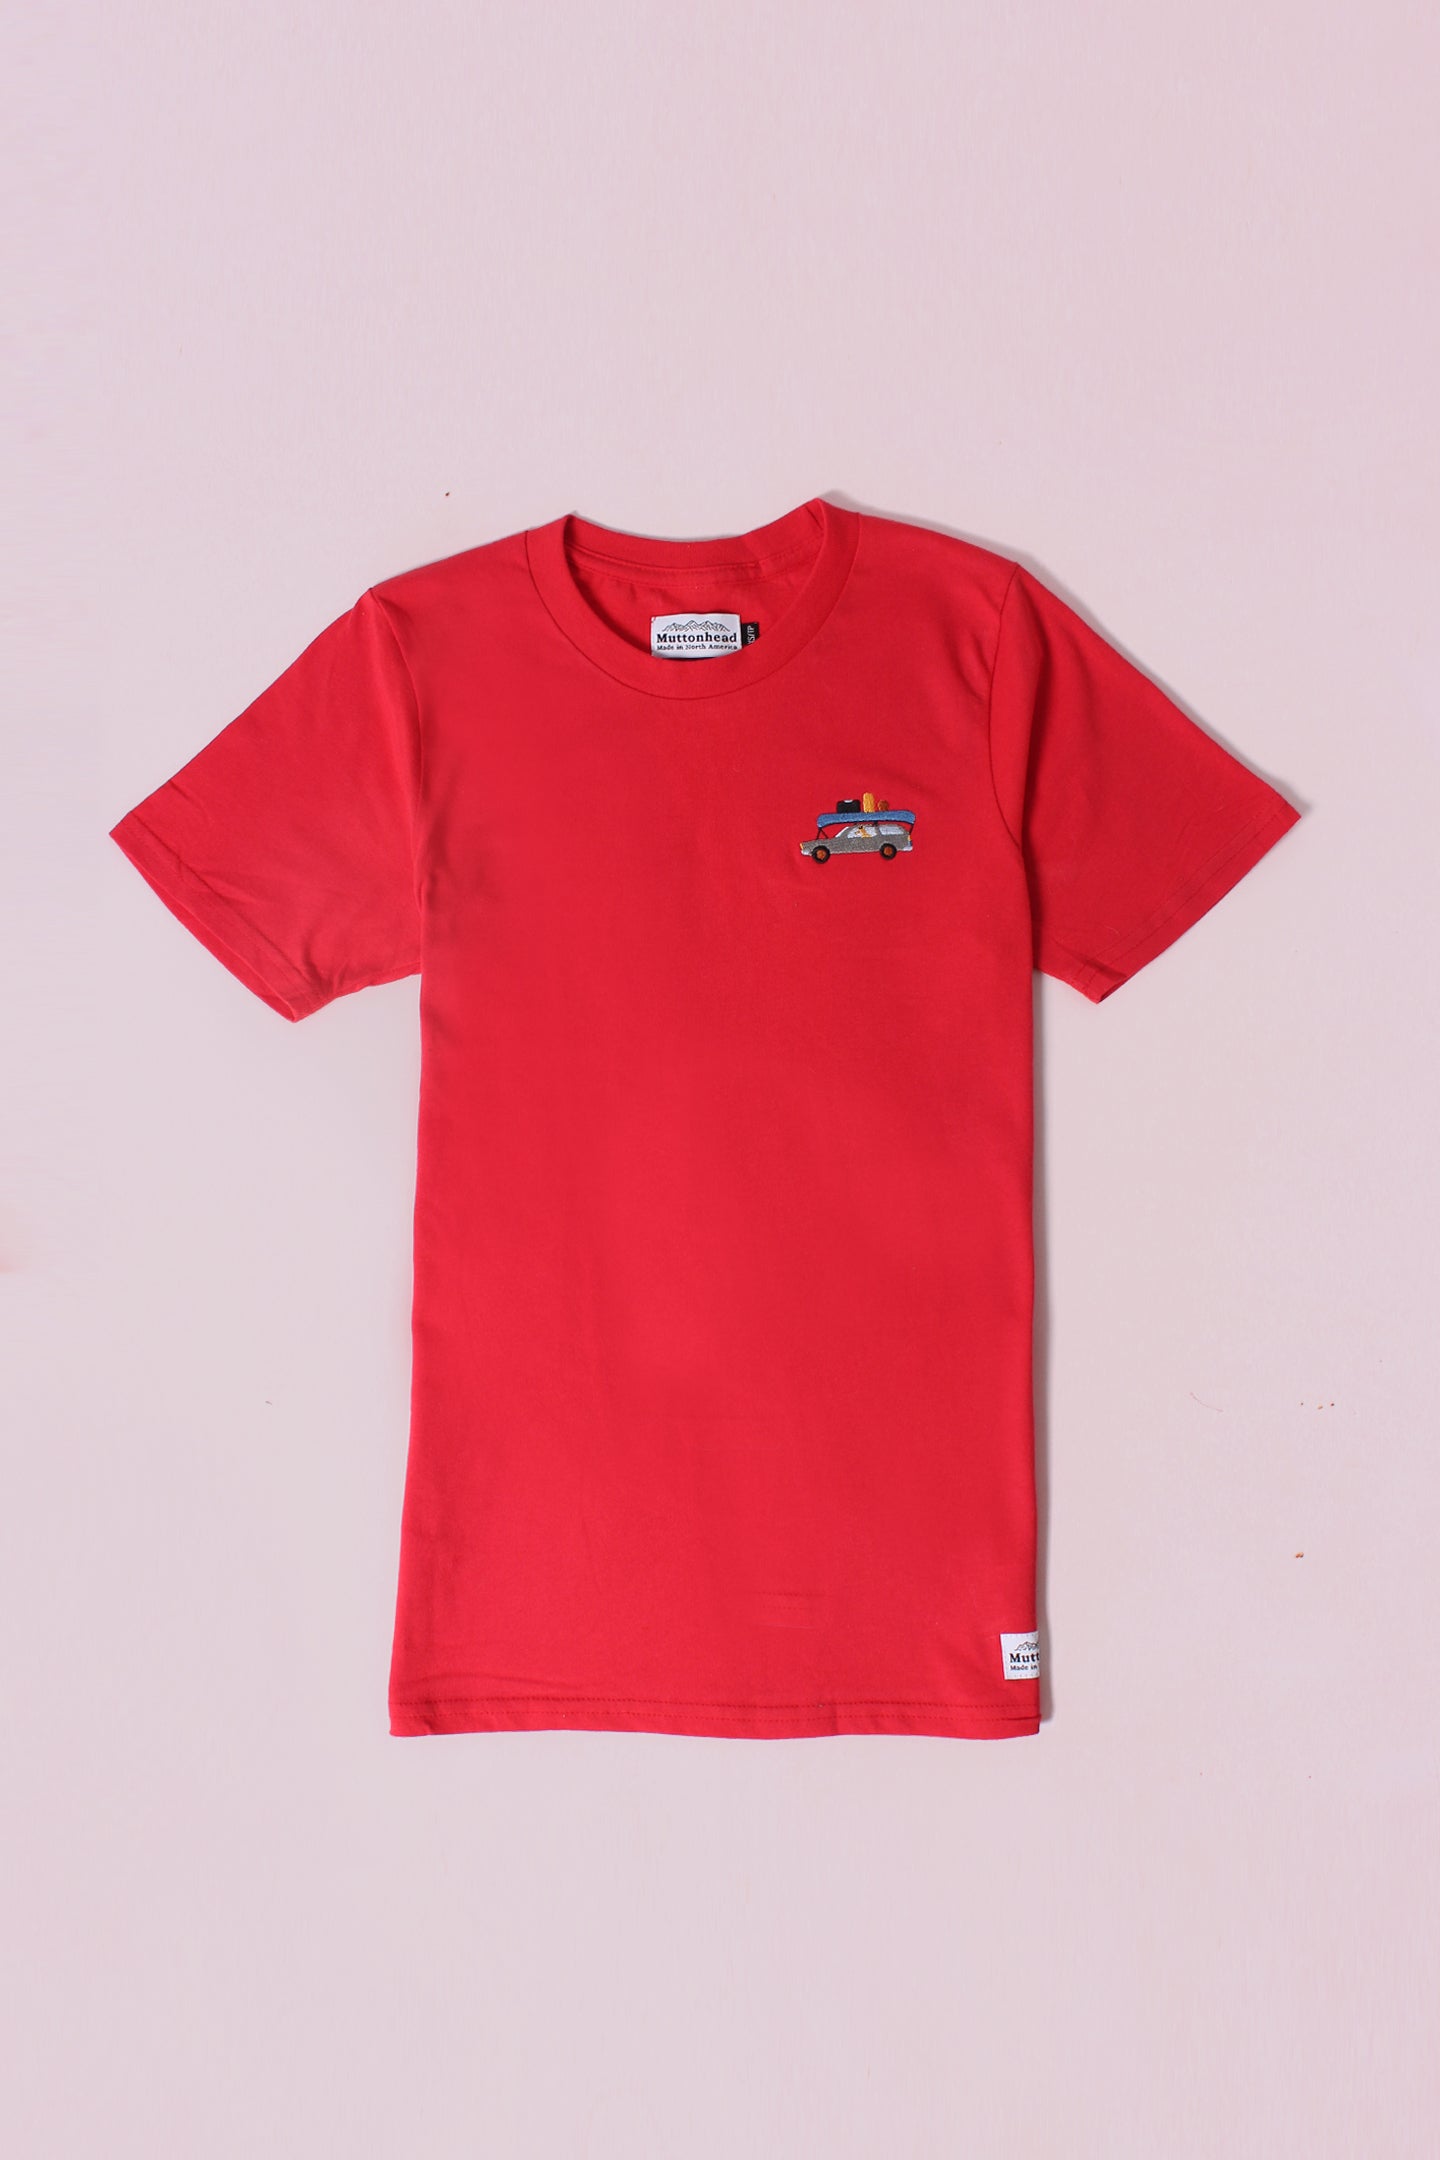 Classic Tee - Red - Road Trip Embroidery - CAMP Series